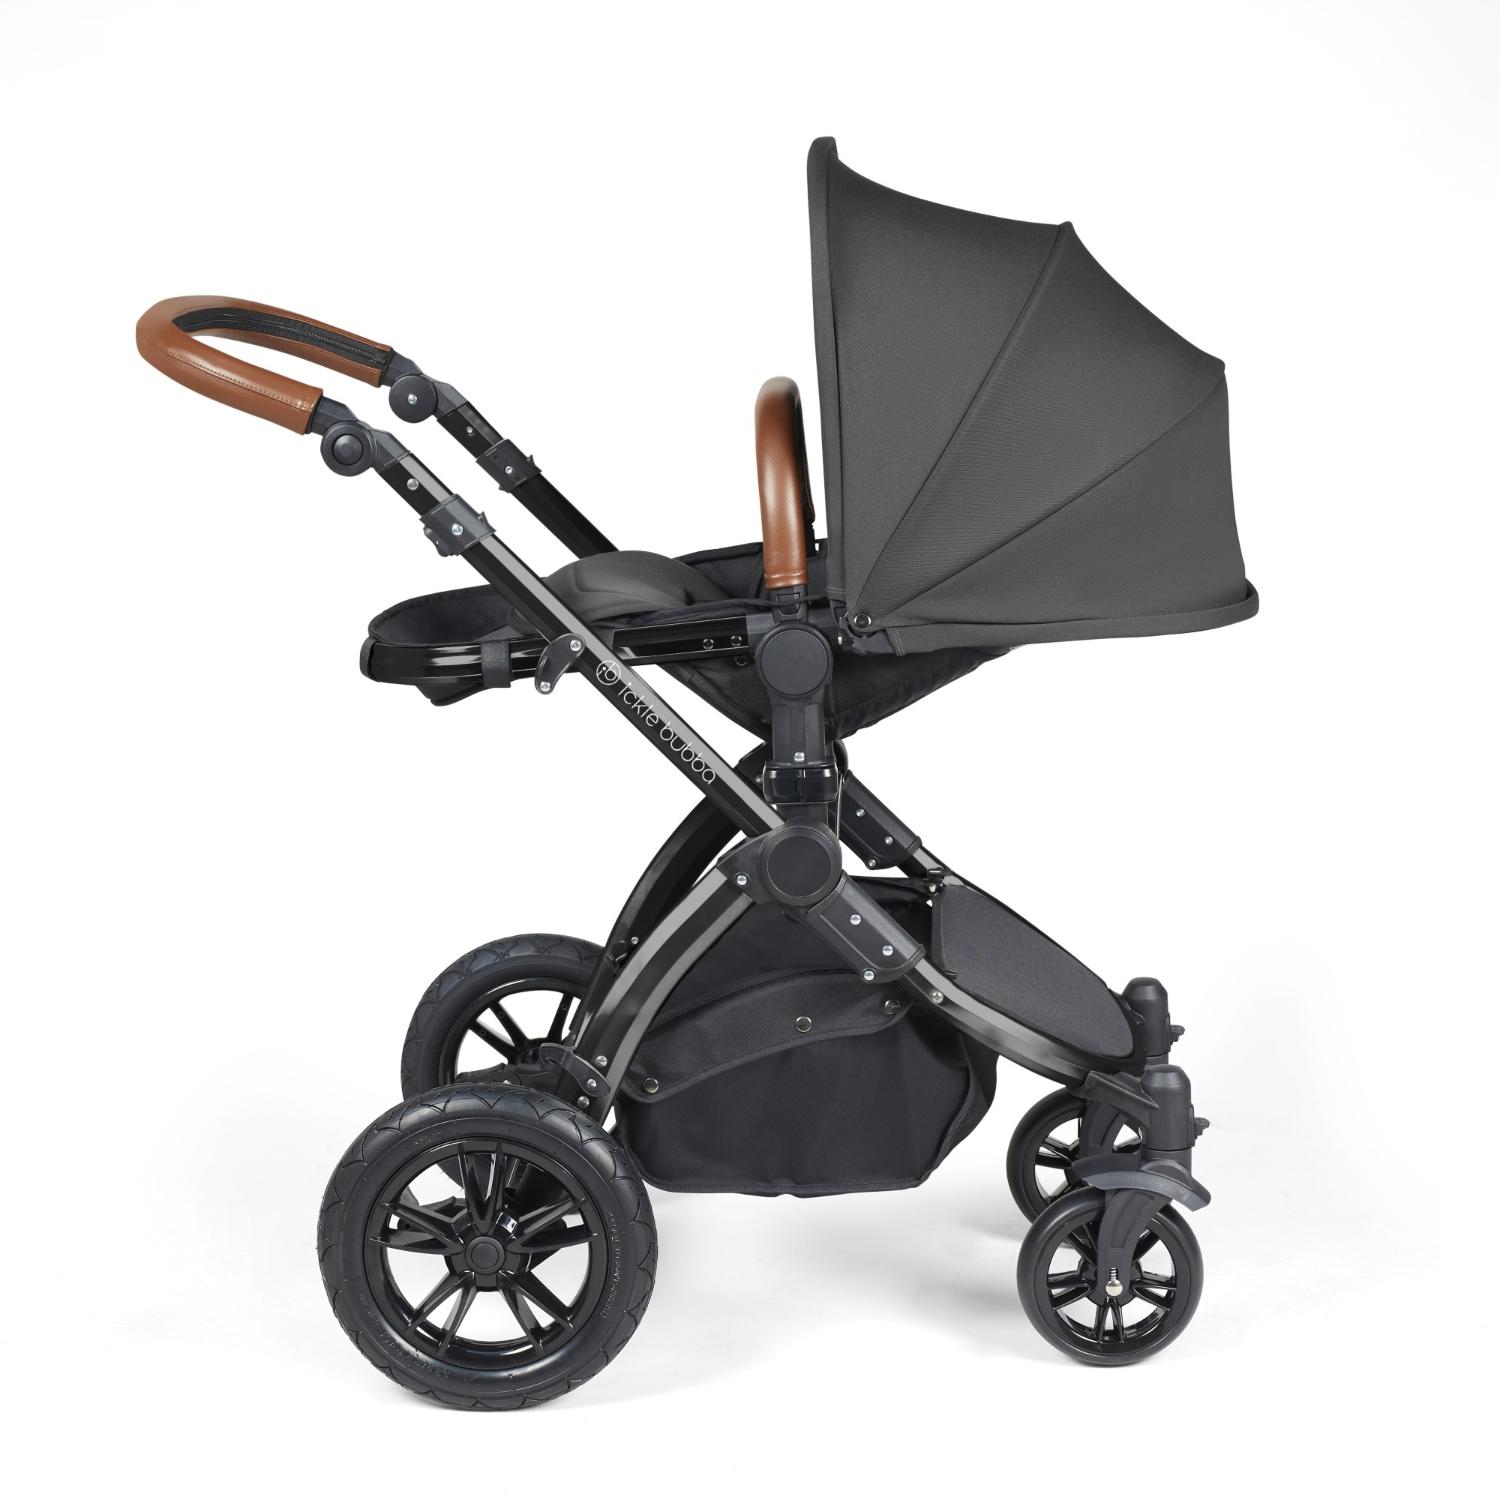 Recline position of Ickle Bubba Stomp Luxe Pushchair in Charcoal Grey colour with tan handle